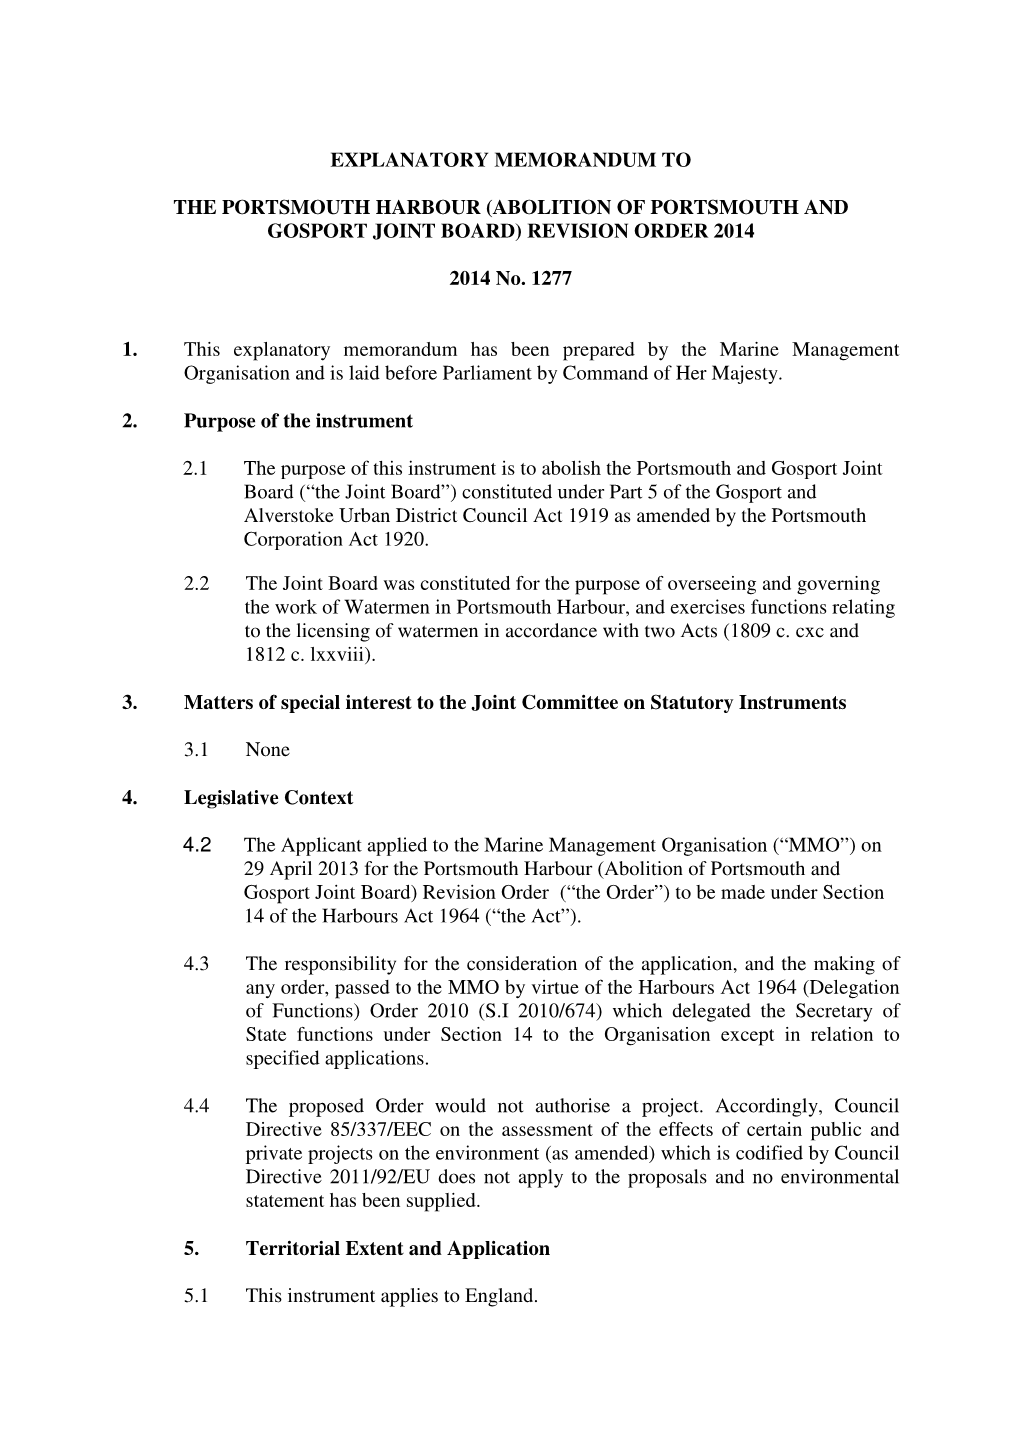 The Portsmouth Harbour (Abolition of Portsmouth and Gosport Joint Board) Revision Order 2014